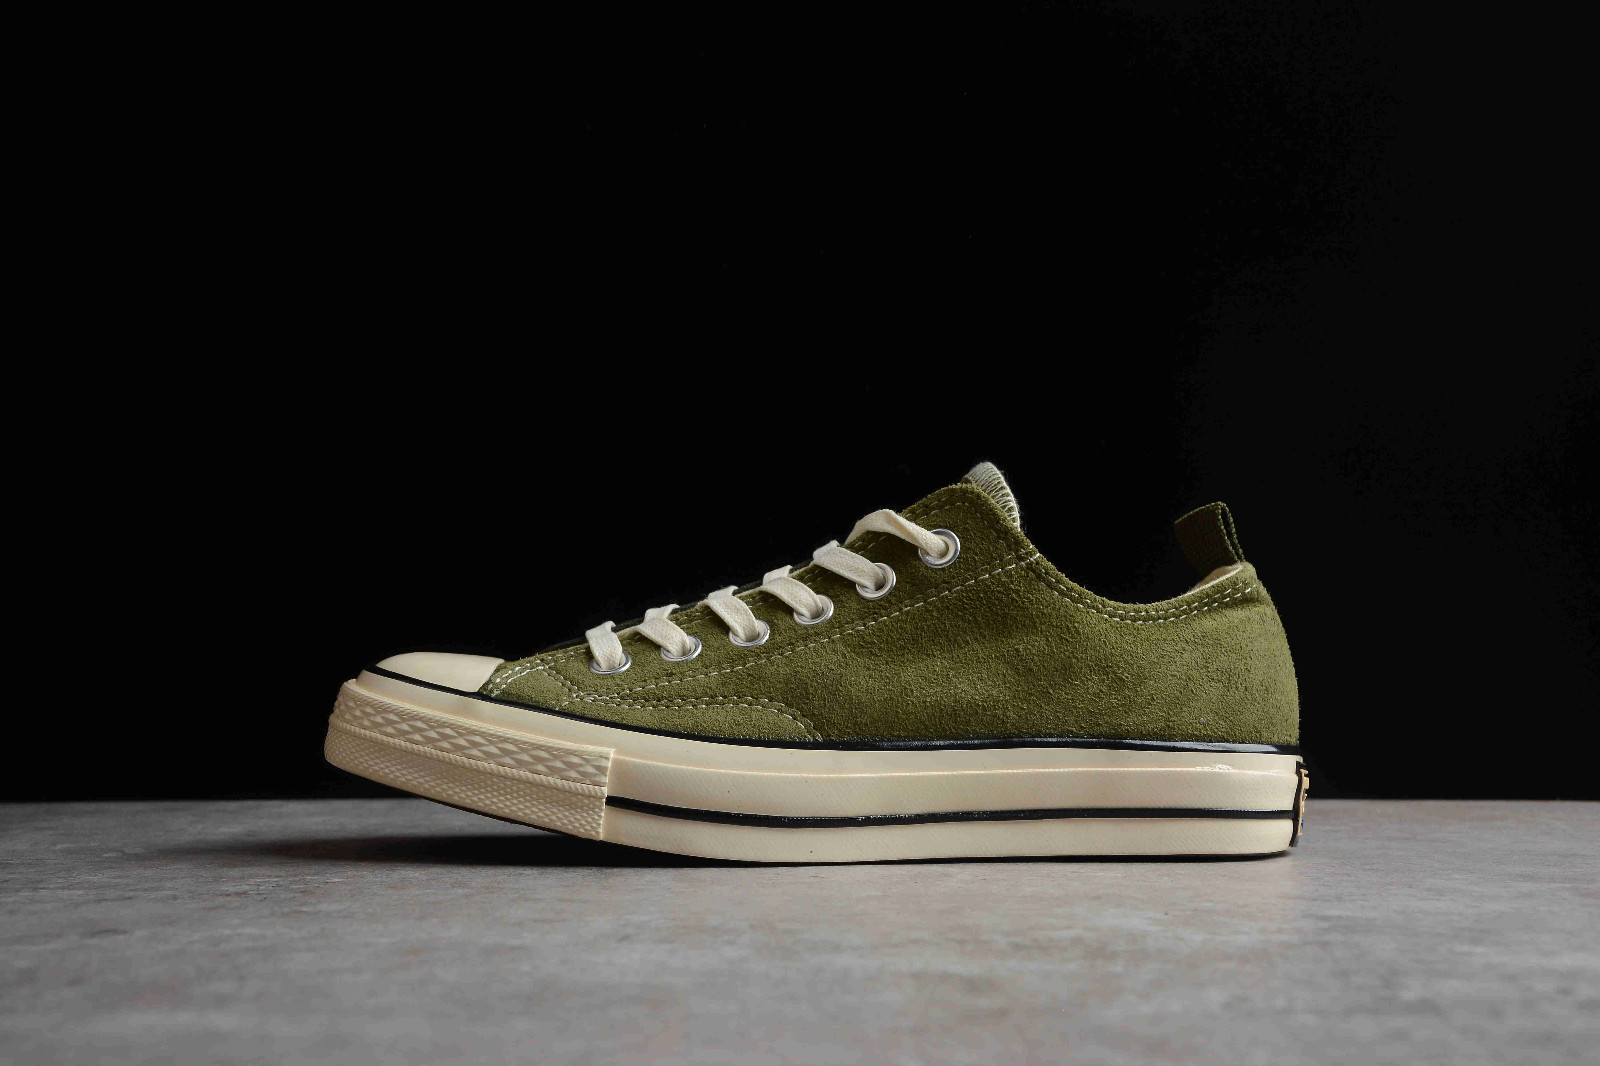 Converse Ctas Egret Piquant Green Black GmarShops - Madness x Converse Taylor All Star Ox Army Green Suede 161026C